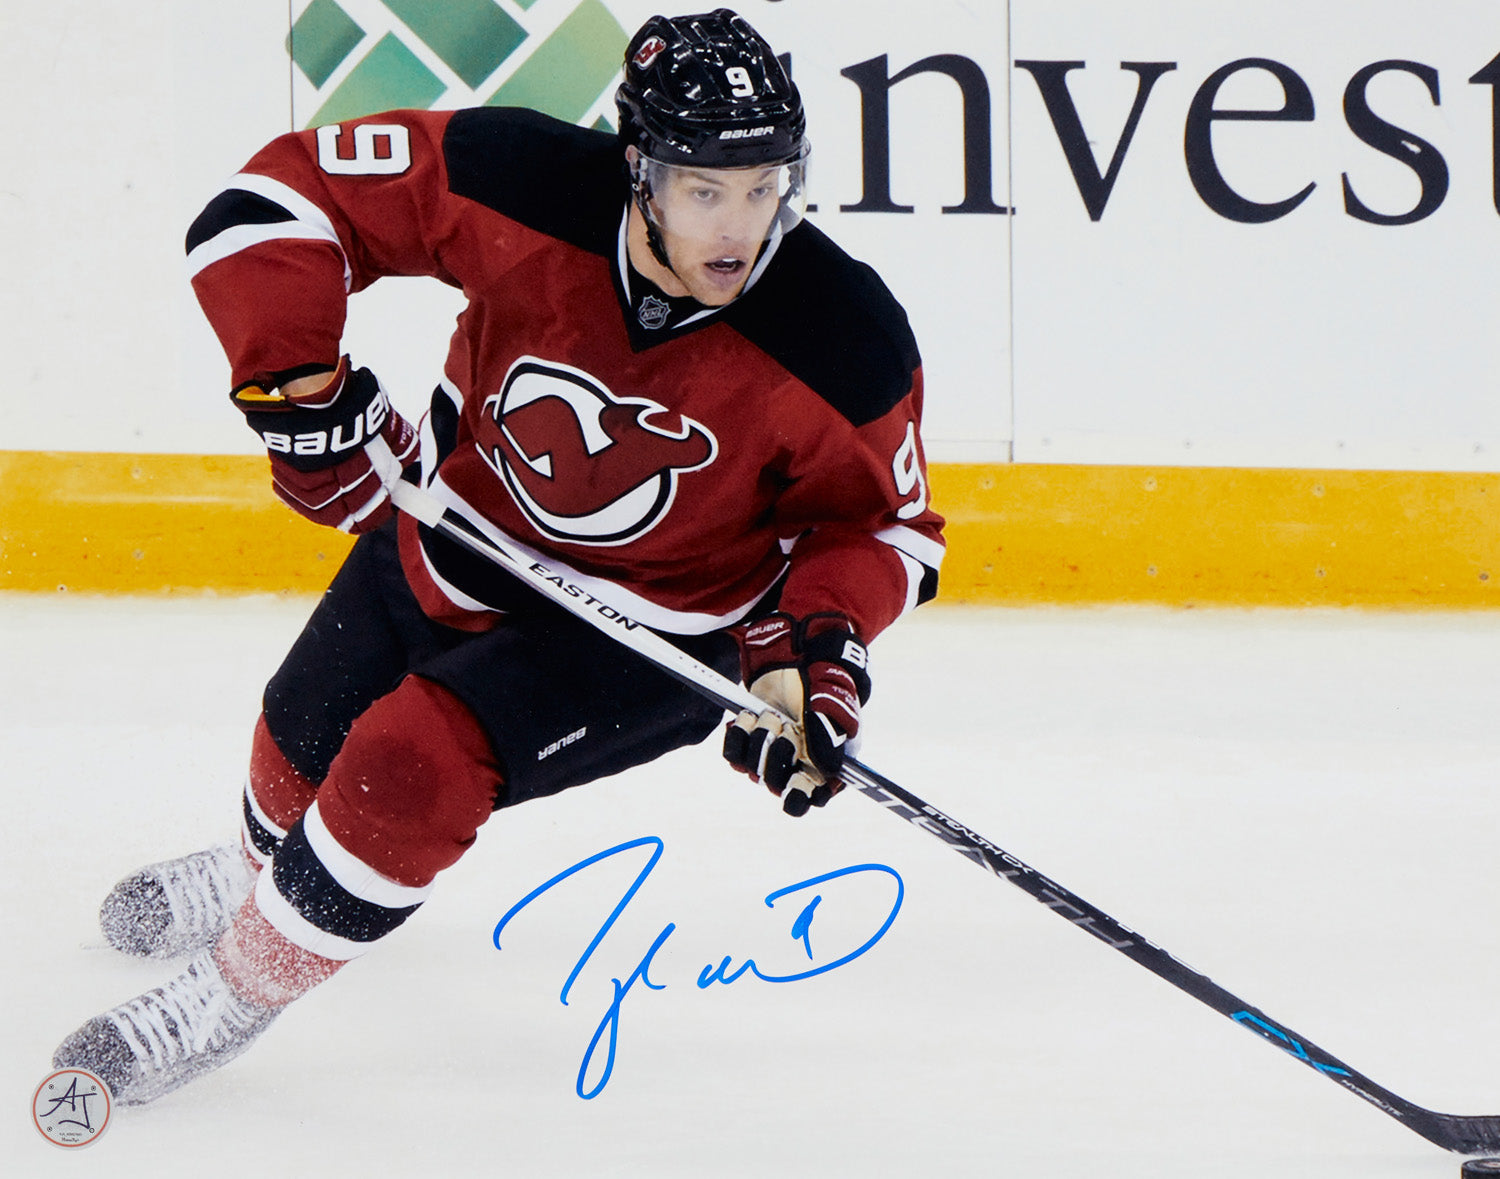 Taylor Hall Signed Devils Playmaker 11x14 Photo